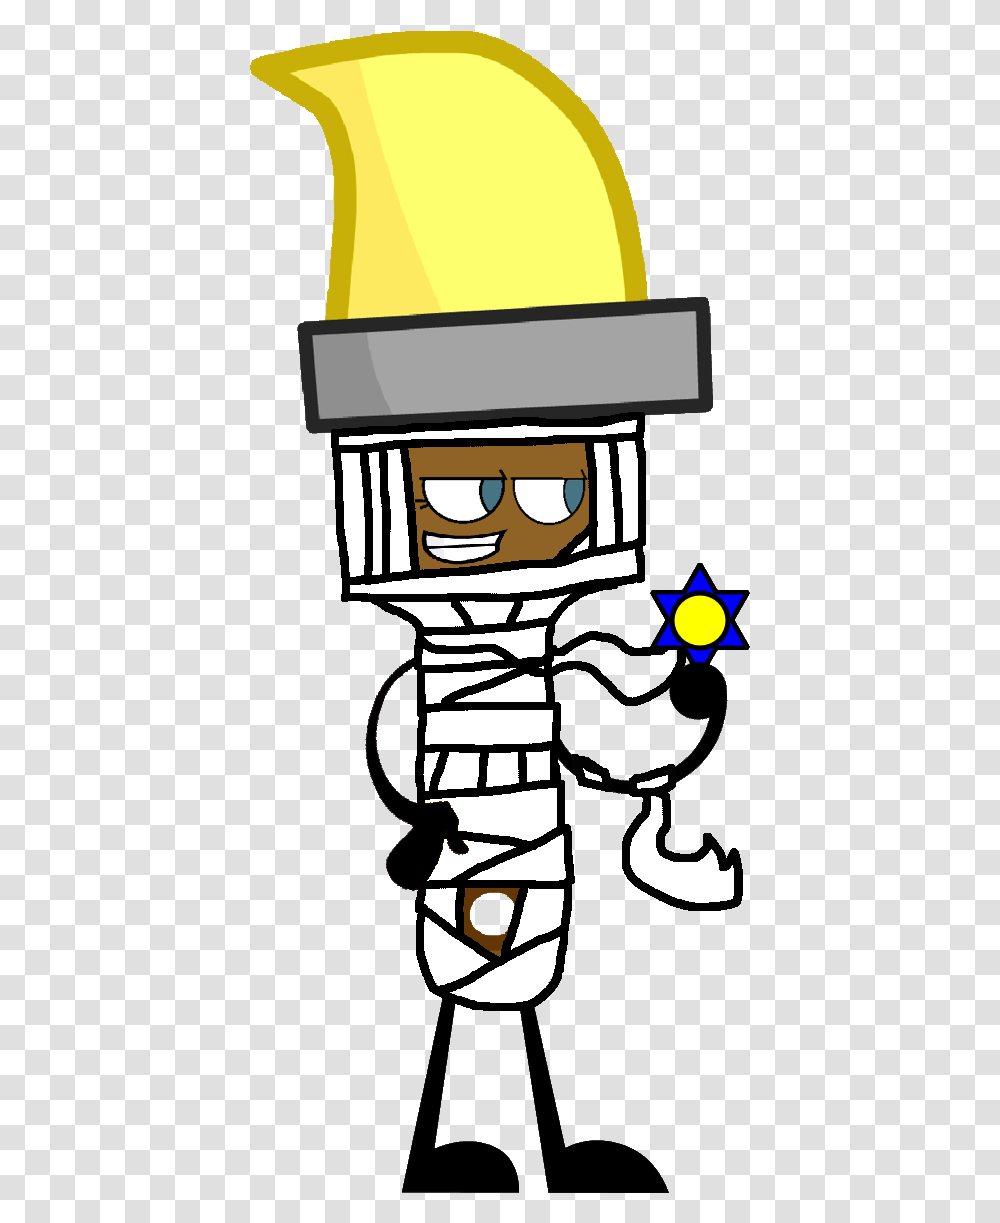 Paintbrush As A Mummy Vector By Thedrksiren Inanimate Insanity Paintbrush X Lightbulb, Book, Comics, Manga Transparent Png